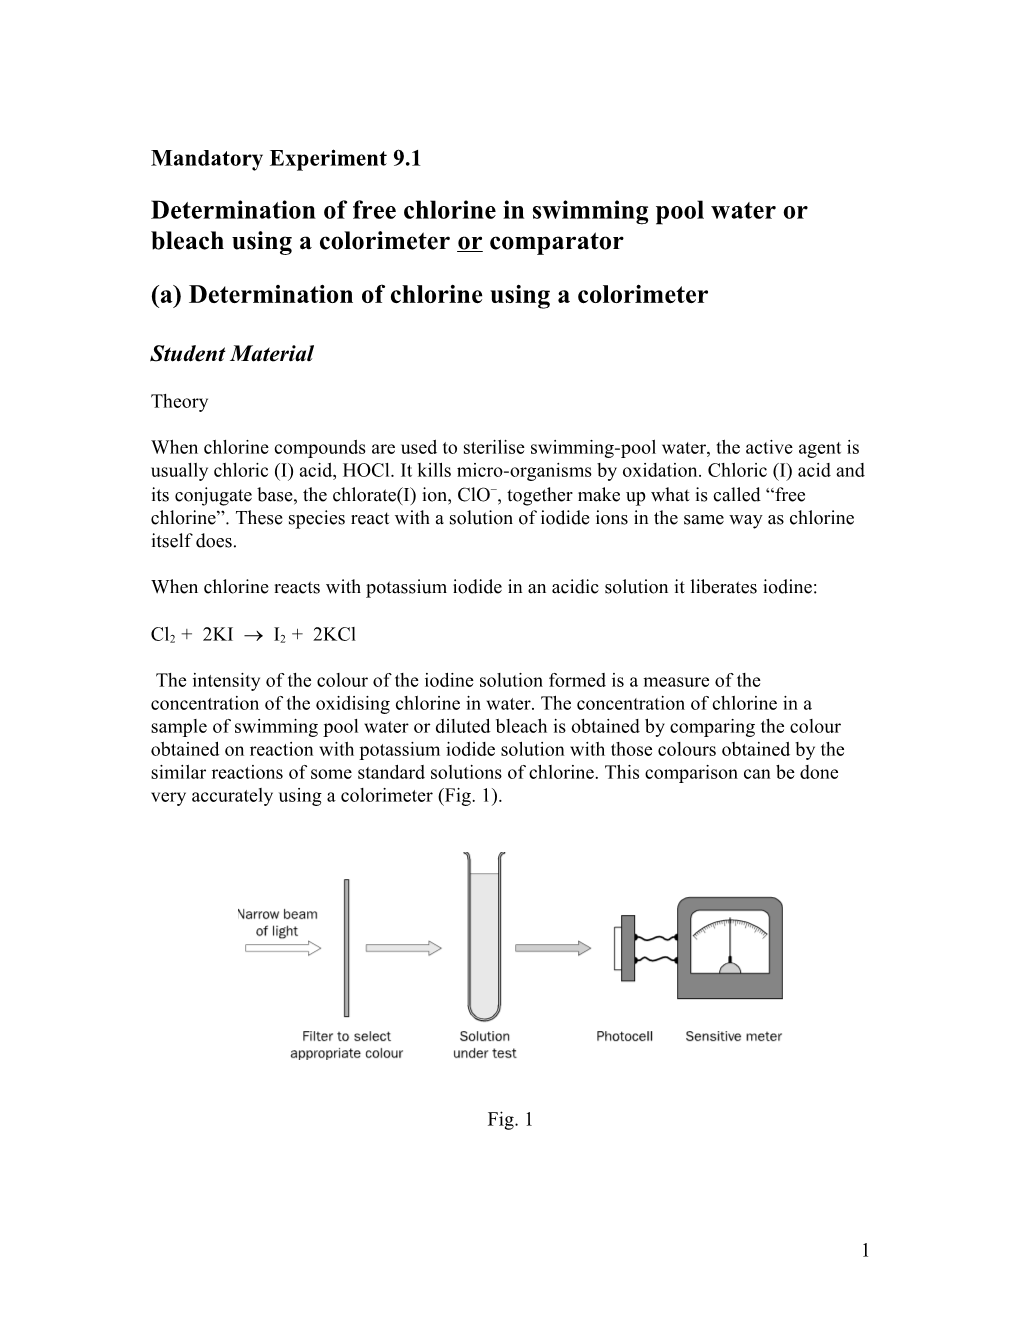 Determination of Free Chlorine in Swimming Pool Water Or Bleach Using a Colorimeter Or